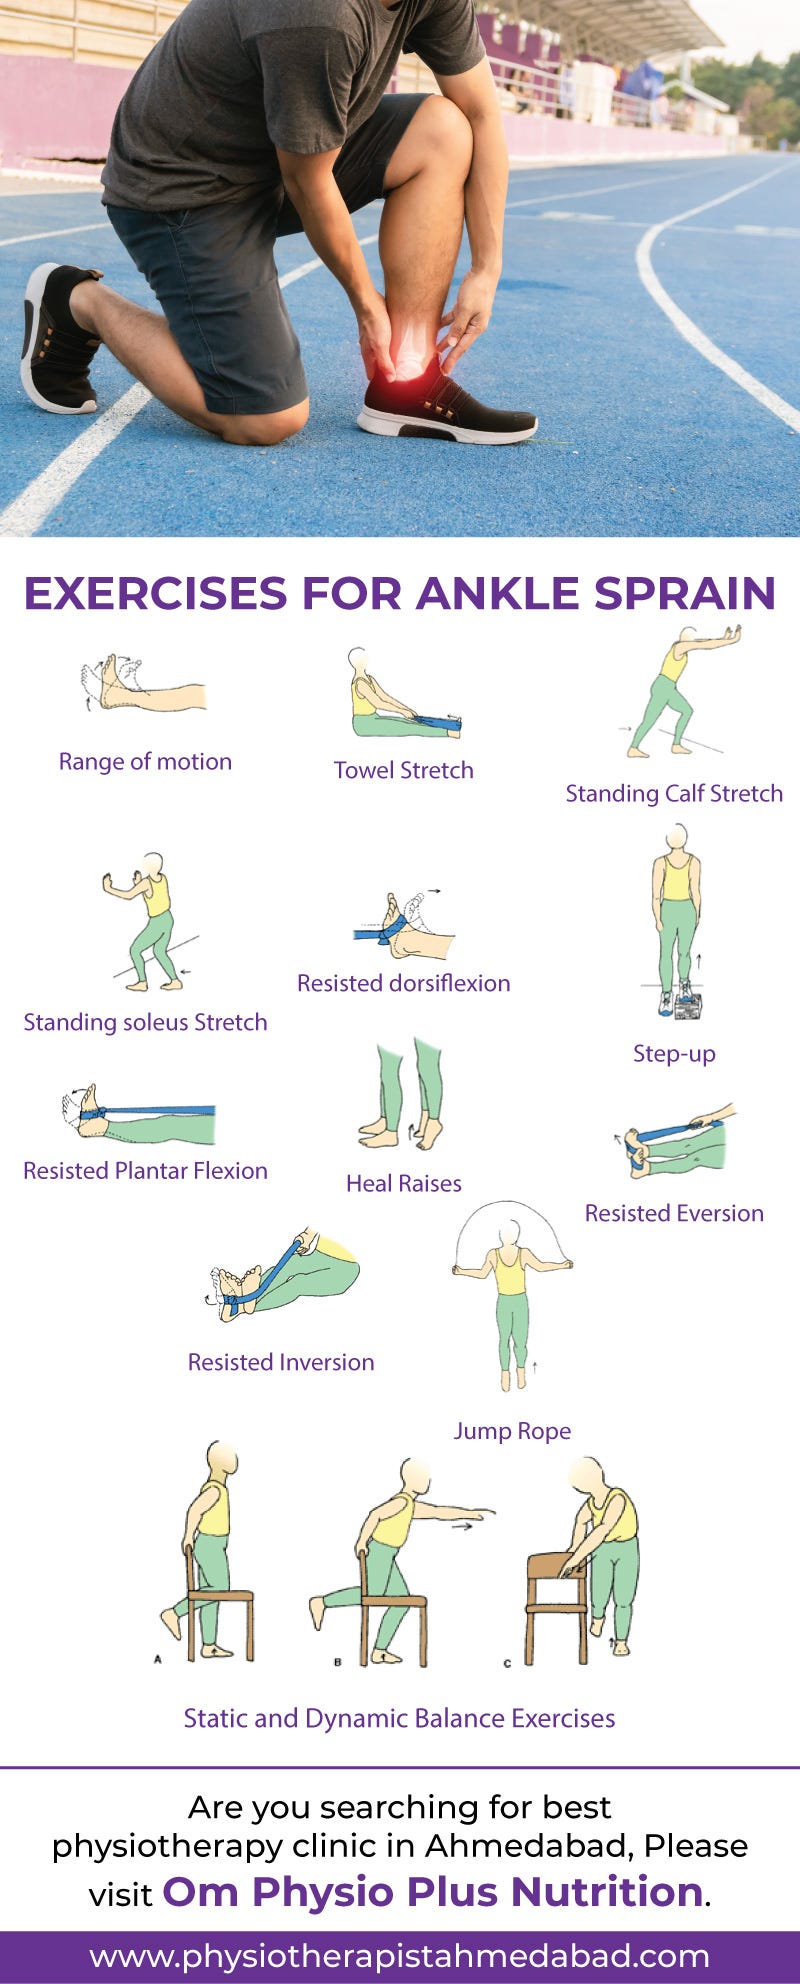 Physiotherapy Exercises for Ankle Sprain, by Om Physio